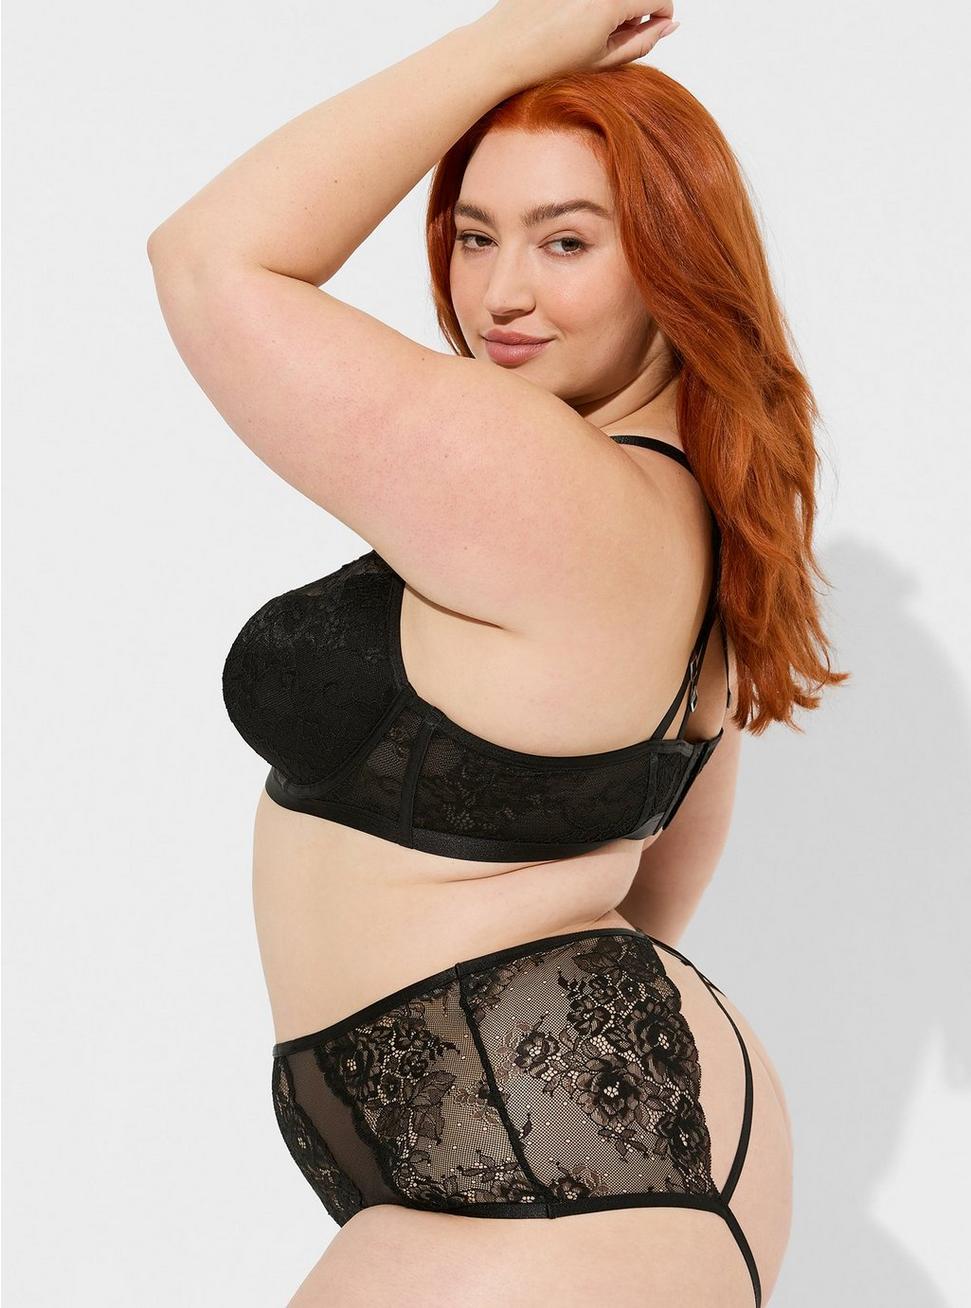 Lace Mid Rise Cheeky Panty With Open Bum, RICH BLACK, alternate